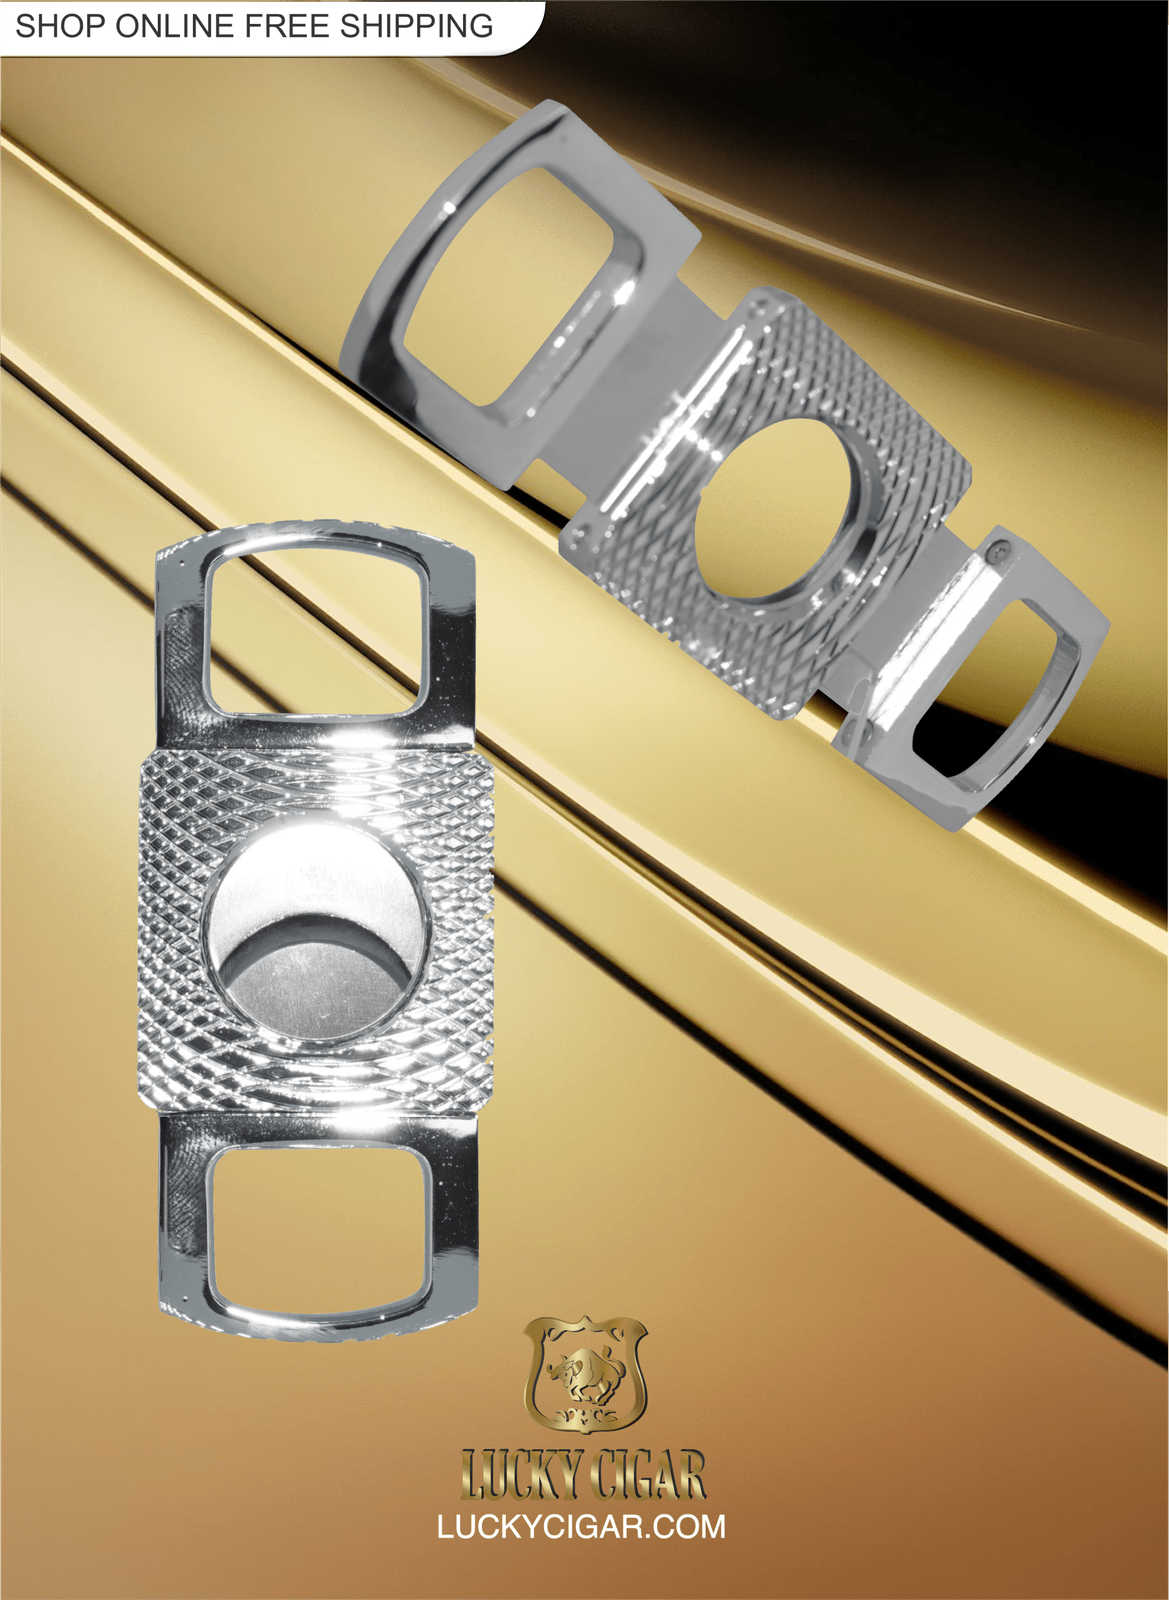 Cigar Lifestyle Accessories: Cigar Cutter in Silver with Snakeskin Pattern